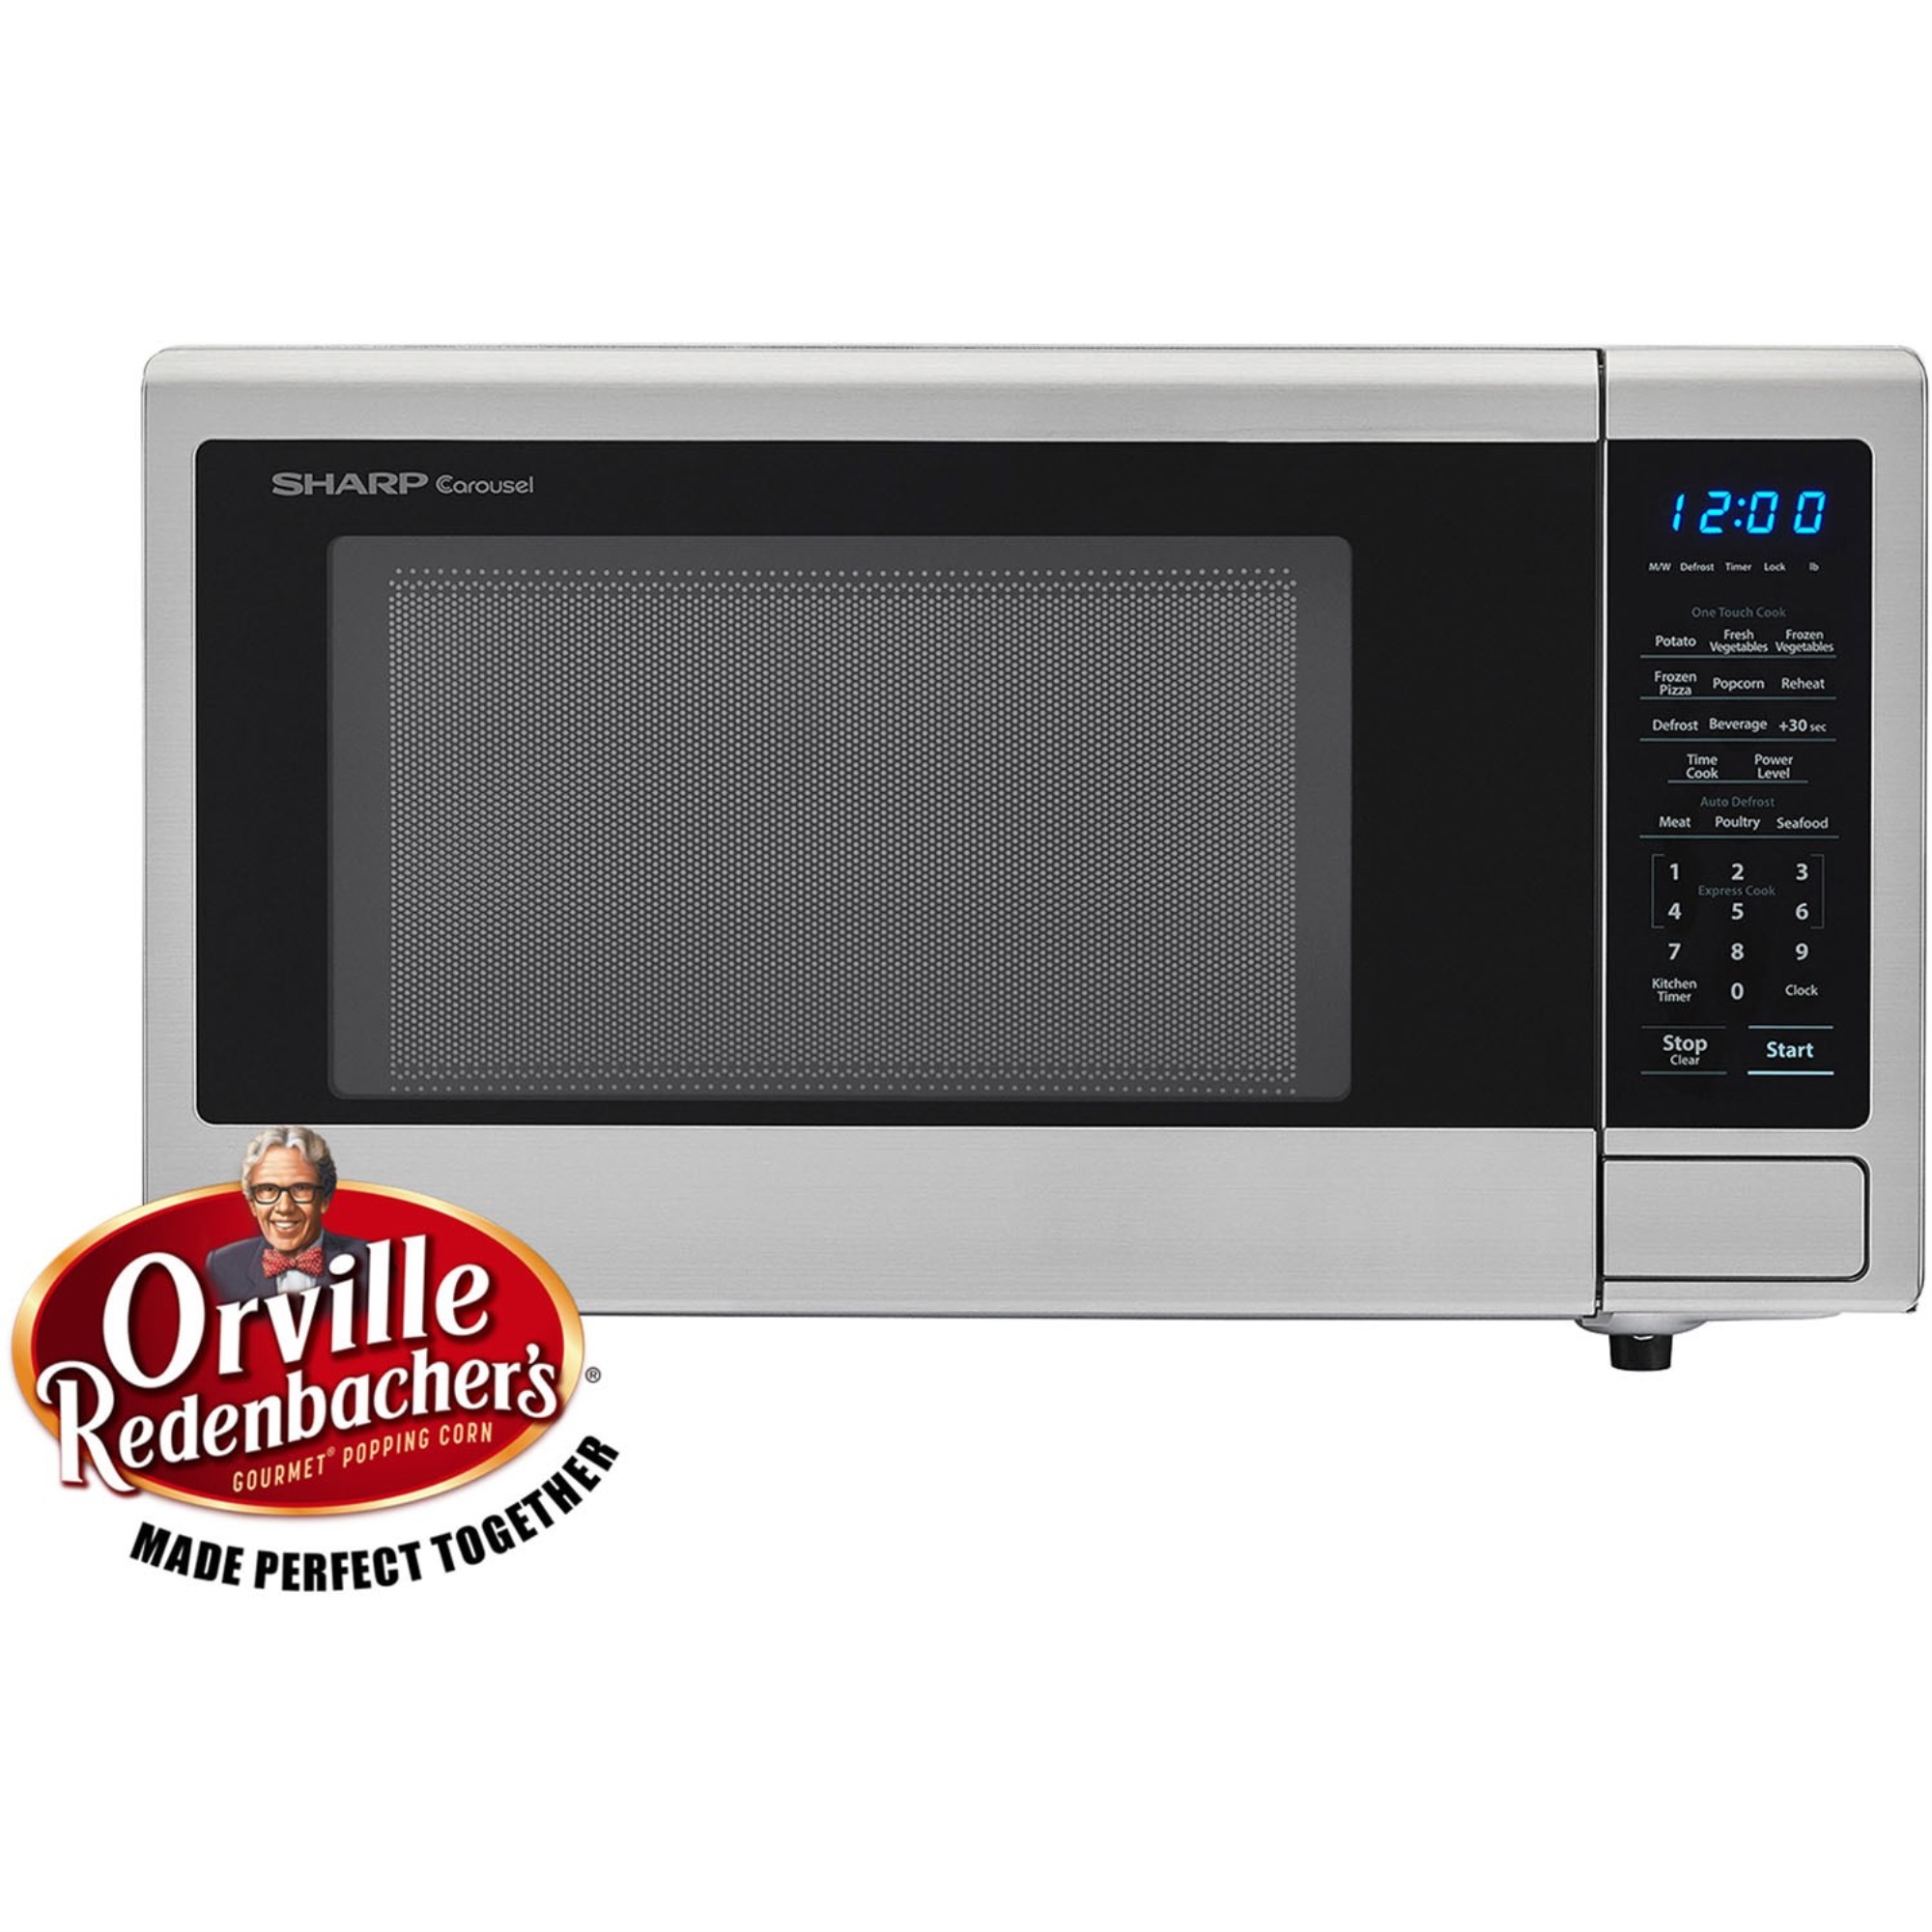 Sharp 1.1 CF Countertop Microwave, Orville Redenbacher&#39;s Certified, 1000W - Stainless